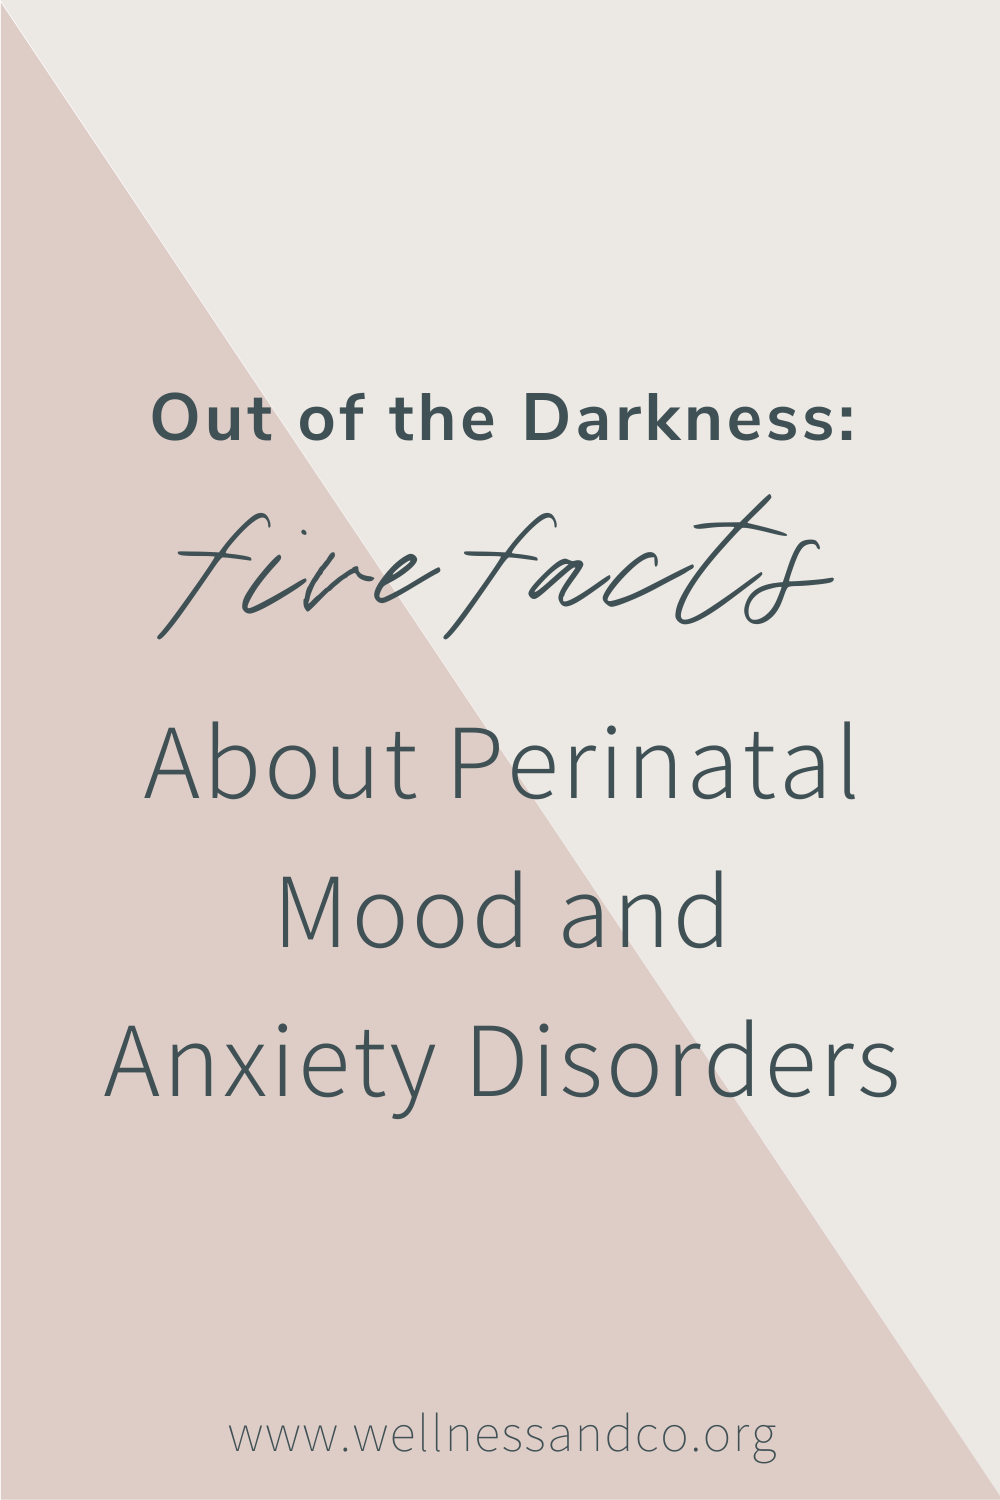 Out of the Darkness: Five Facts About Perinatal Mood and Anxiety Disorders | Have you ever felt angry at your baby? Distant from your baby? Or, like you could hurt your baby? This blog explores the intense layers of motherhood many women experience and suffer in silence from. Five facts help you better understand whether you've experienced postpartum depression and how to combat the shame surrounding it. Plus, you'll have direct access to a support group for moms!